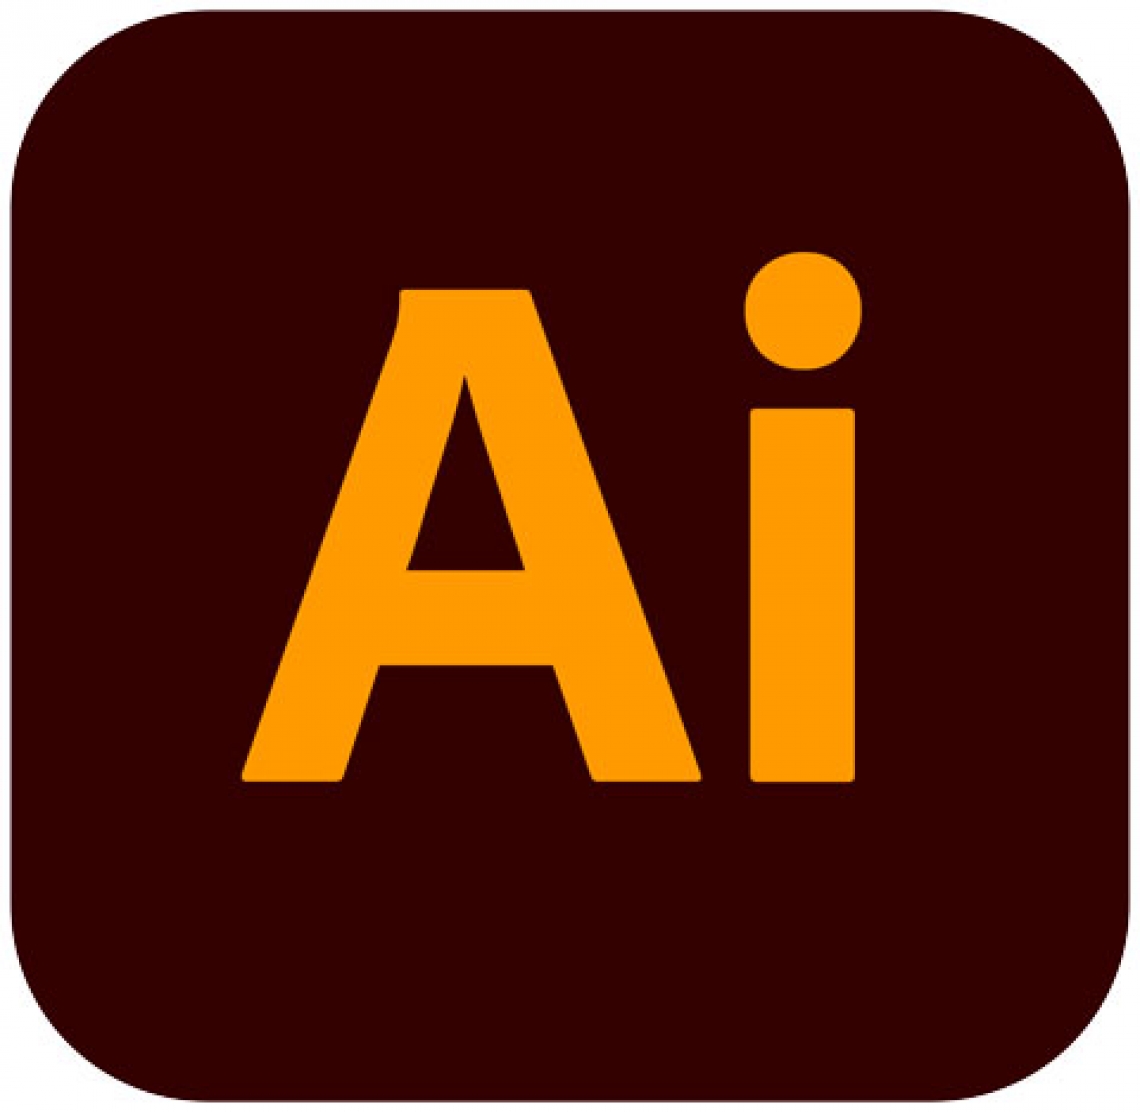 adobe illustrator what is it used for